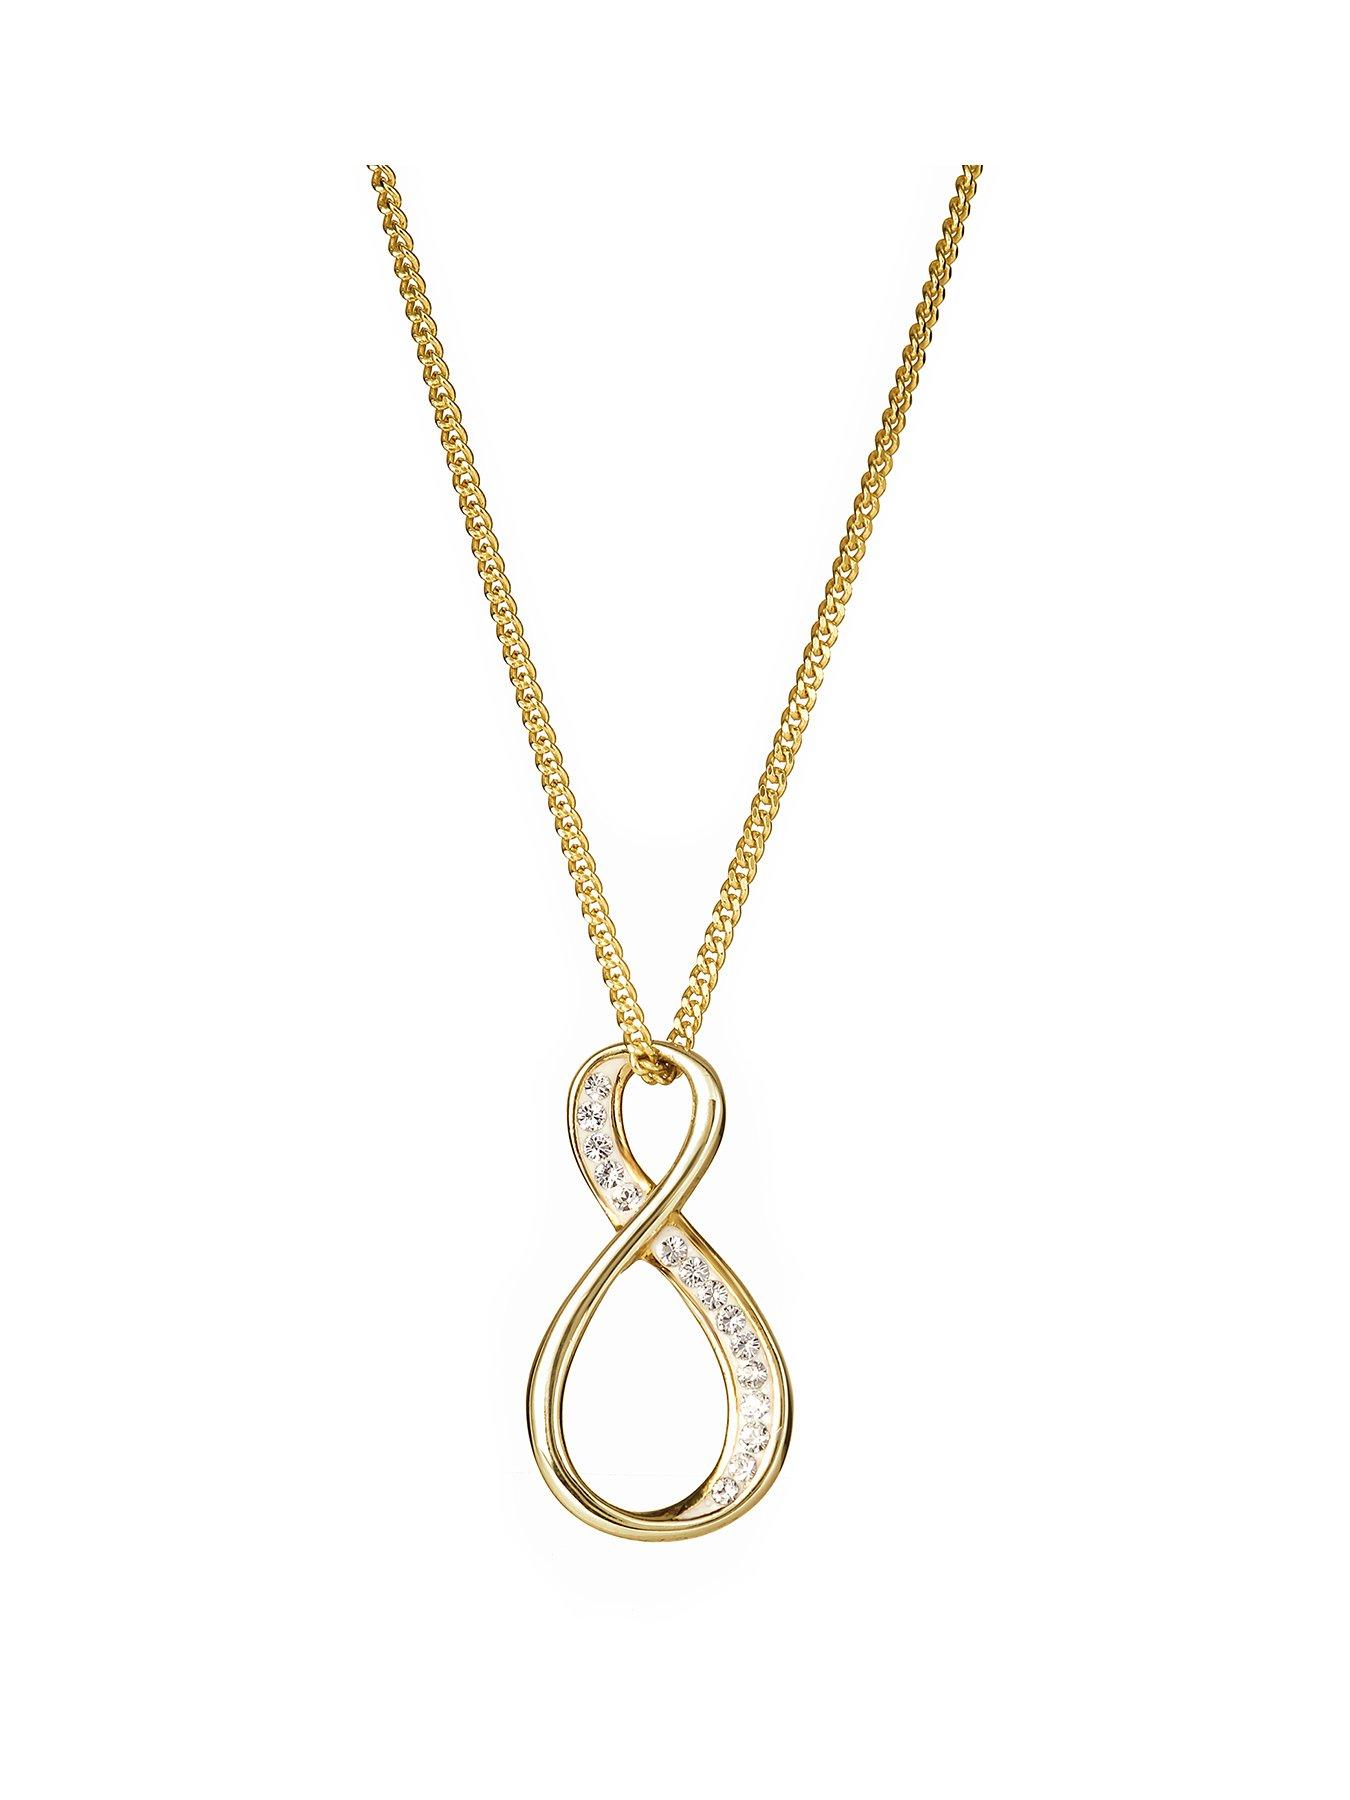 Jewellery & watches Evoke Sterling Silver Gold Plated Crystal Infinity Pendant Necklace 16+2 inches